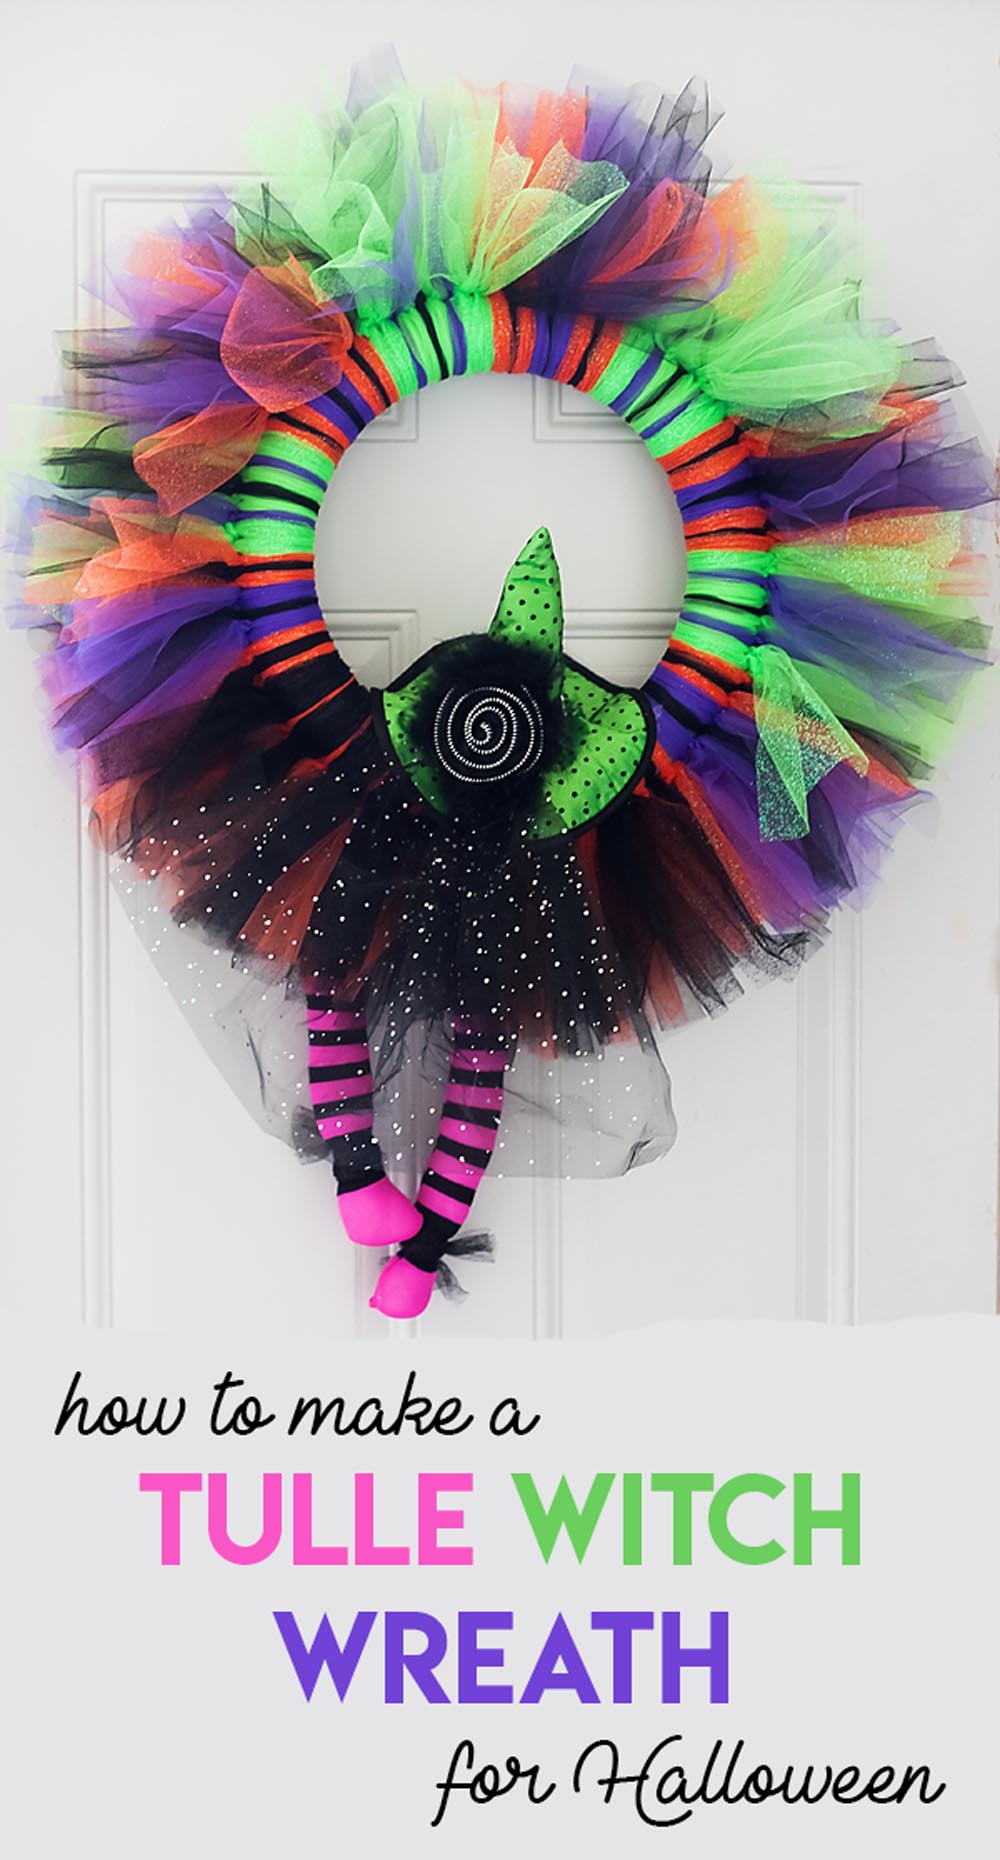 DIY Tulle Witch Wreath for Halloween via @lara_neves